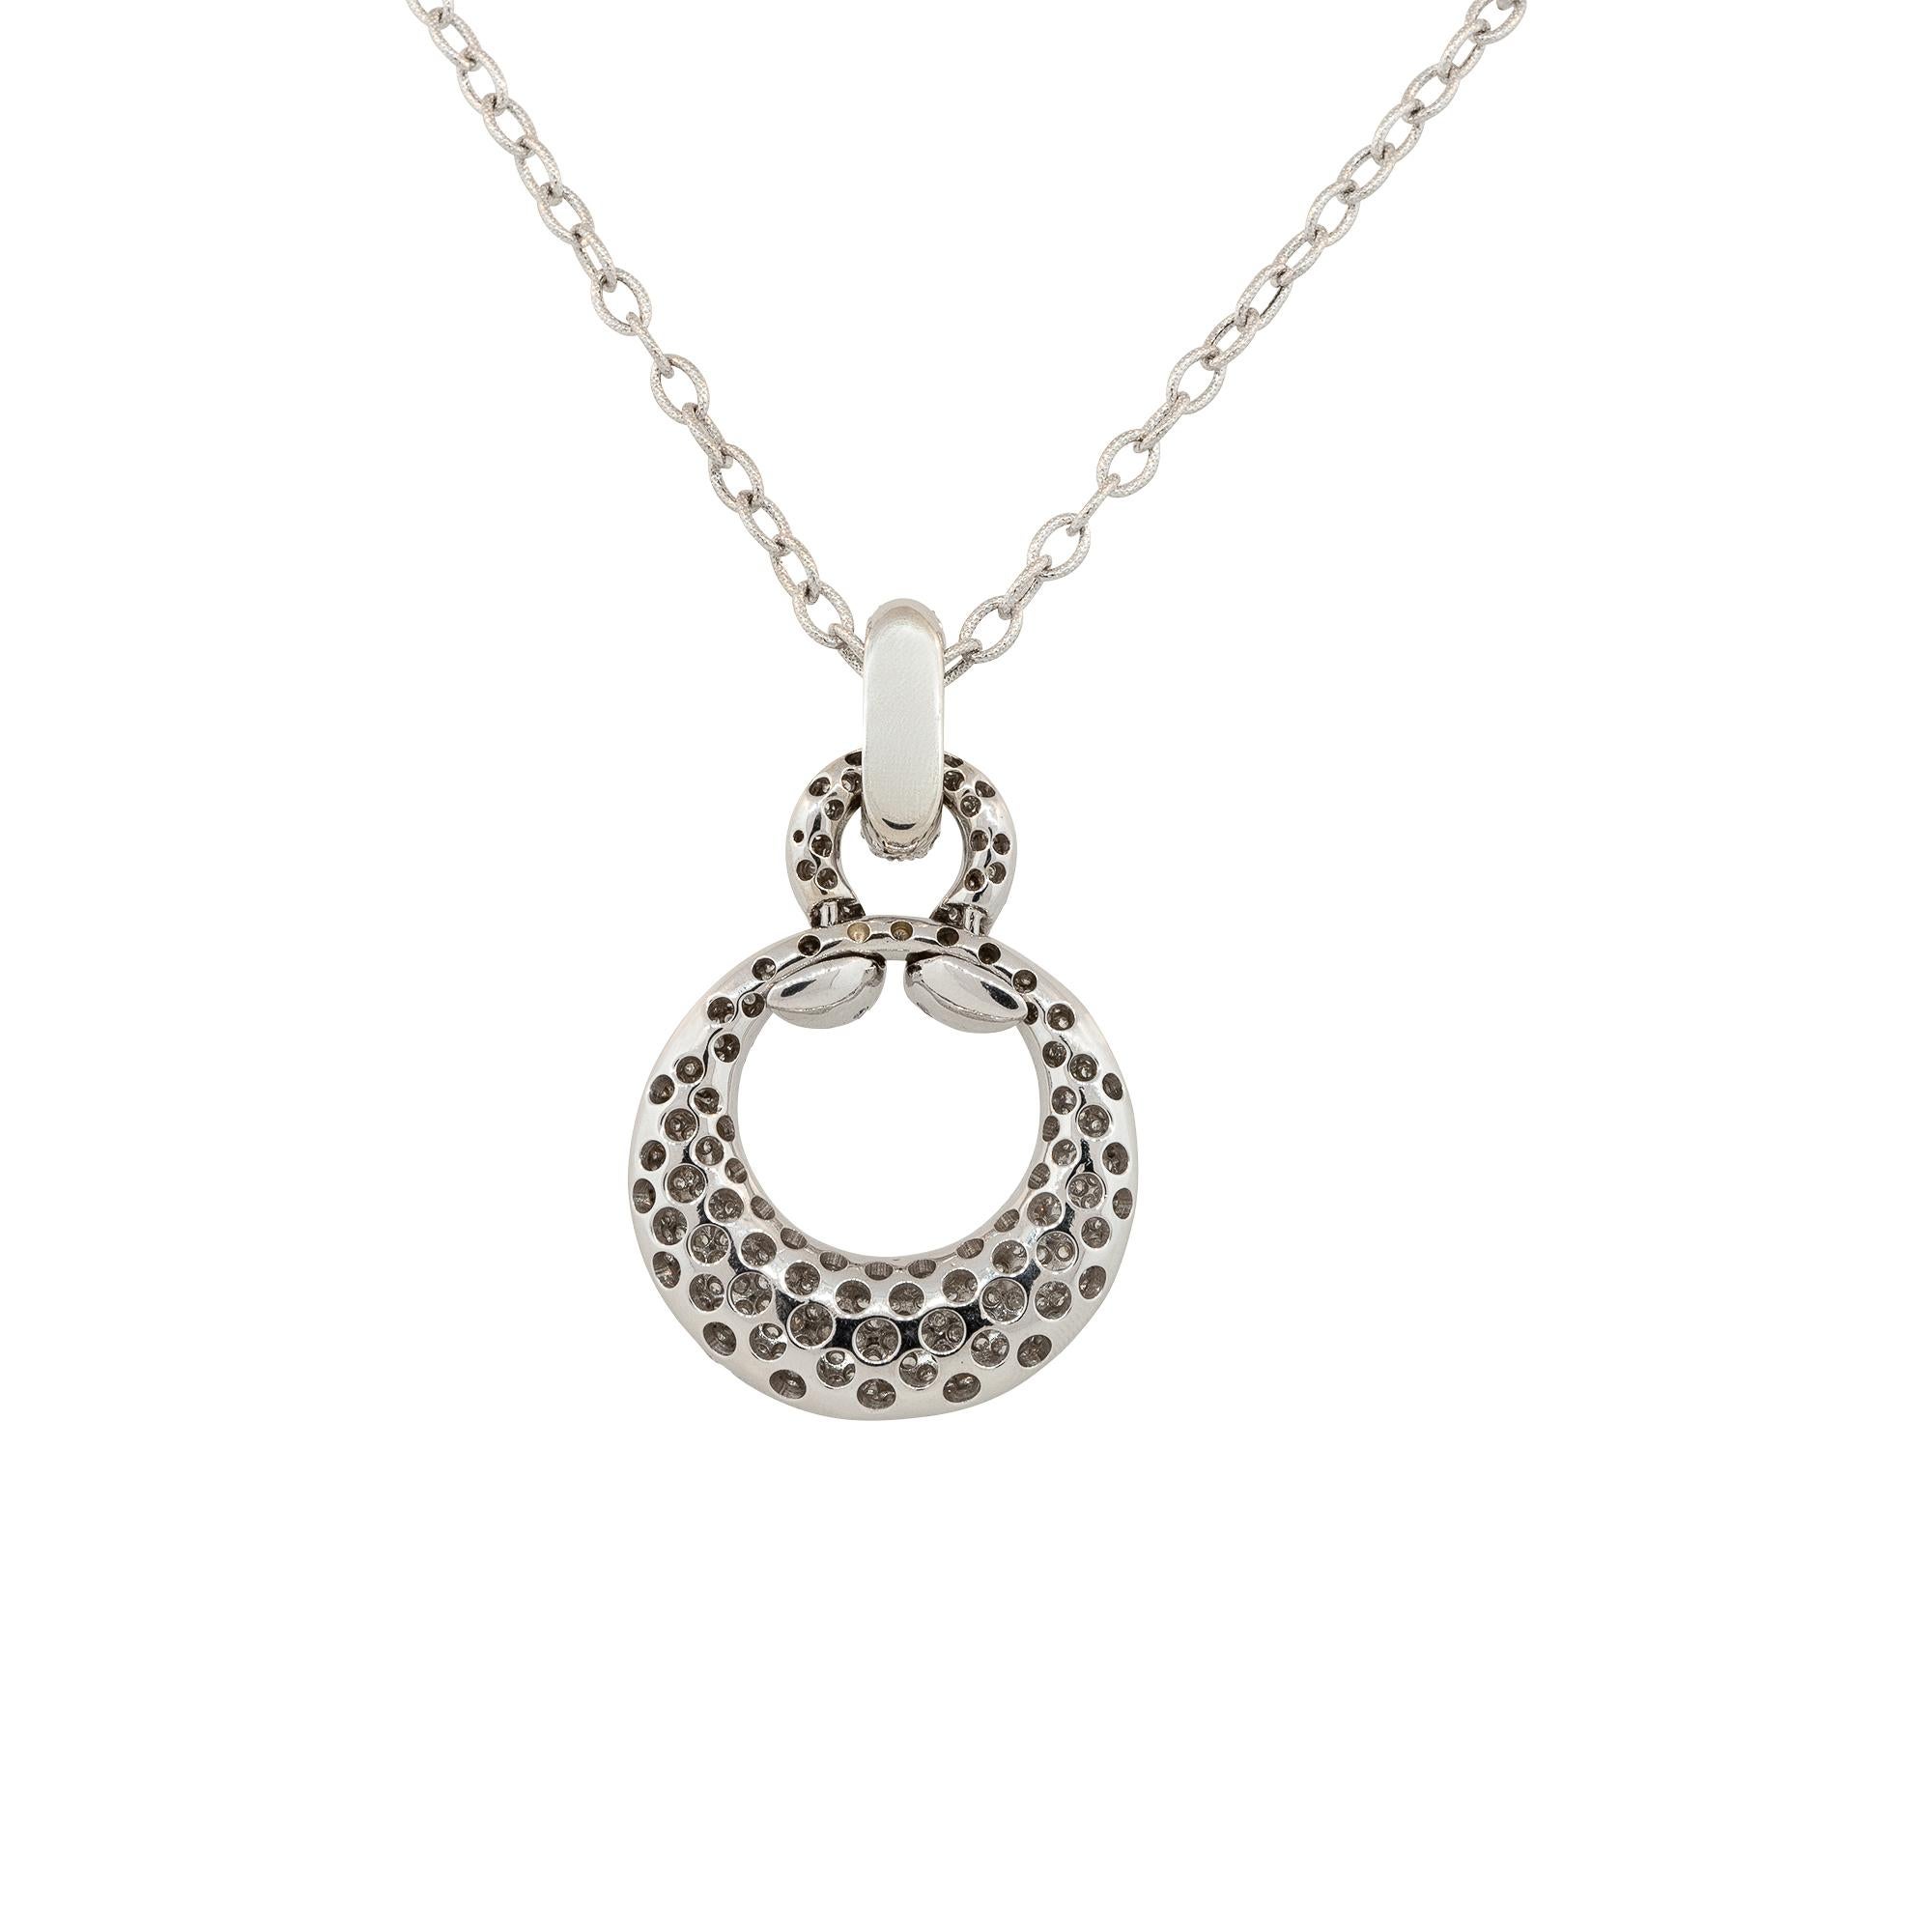 14k White Gold 3.00ctw Diamond Pave Round Pendant Necklace

Material: 14k White Gold
Diamond Details: Approximately 3.0ctw of Round Pave Set Diamonds
Total Weight: 16.6dwt 
Length: 16